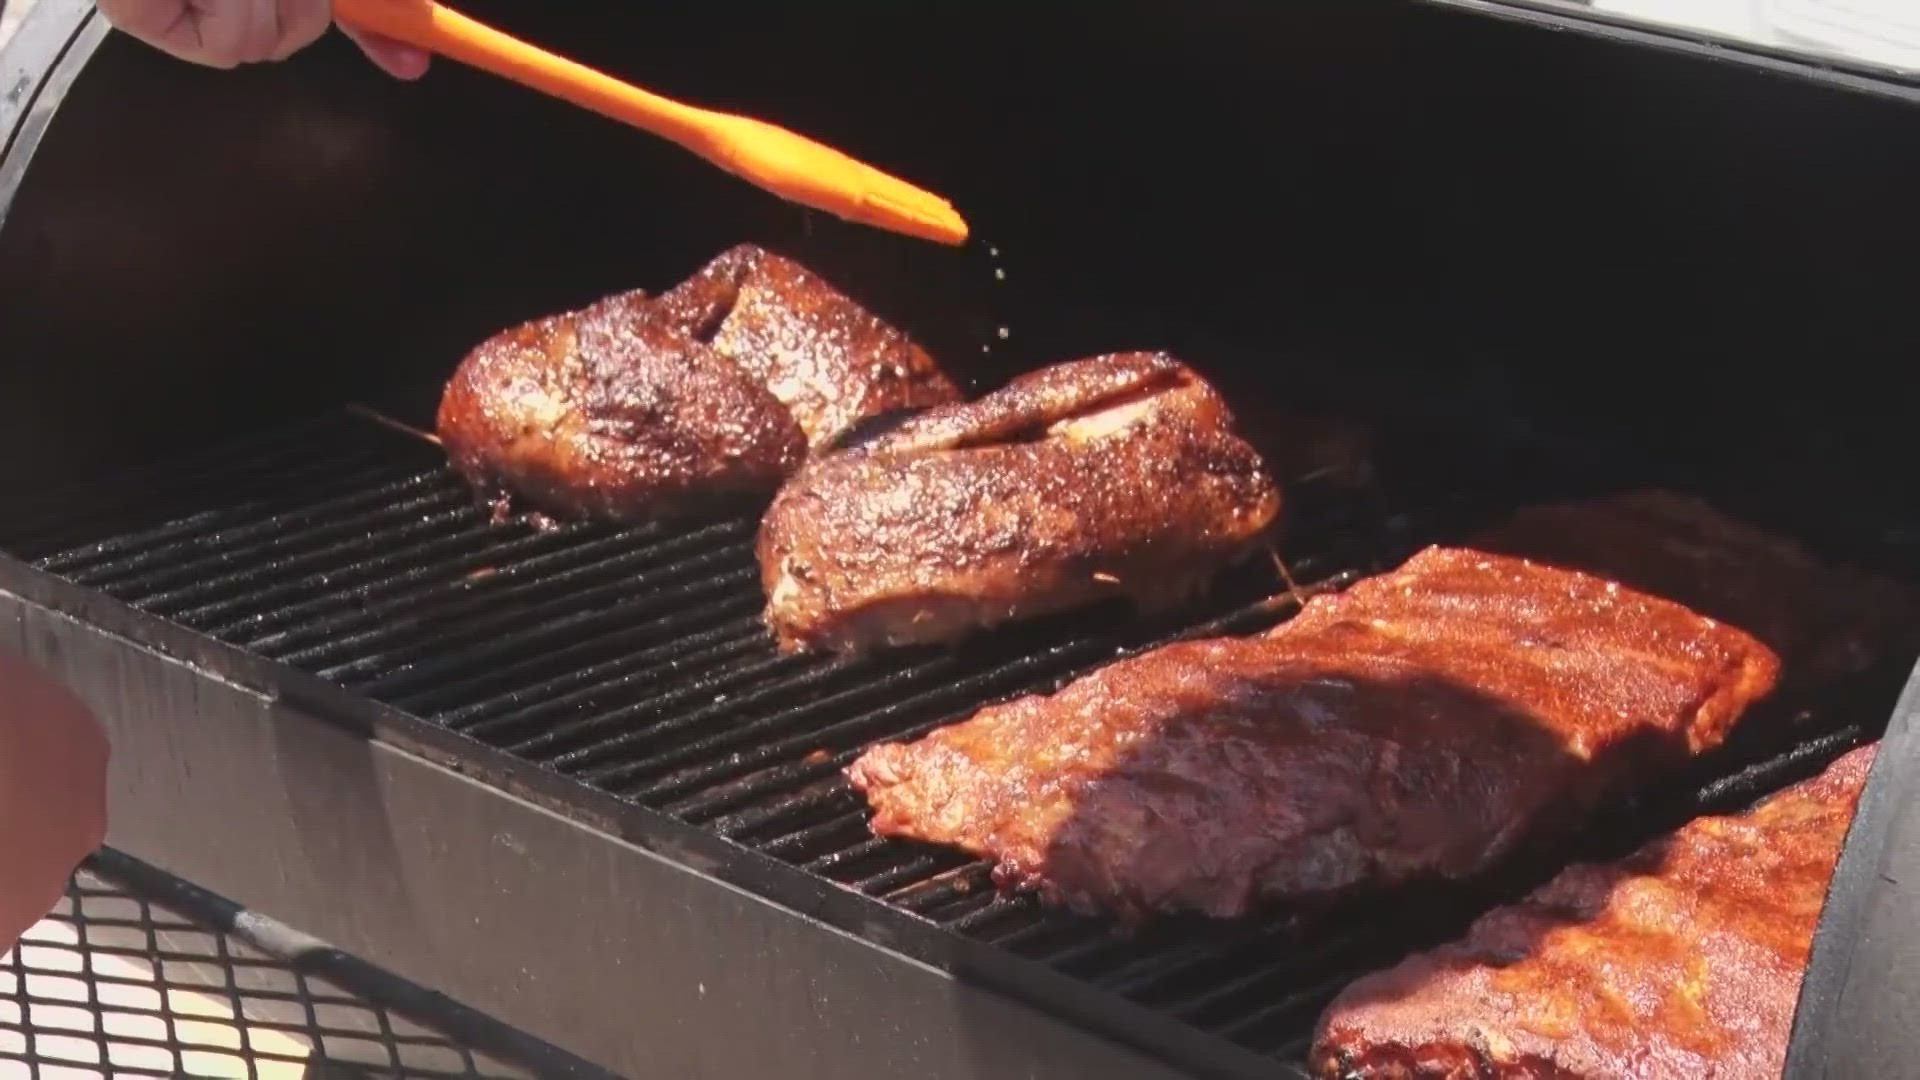 Students in Central Texas are using their skills on the smoker. On Friday, April 21, 14 schools competed in the Regional High School BBQ competition.